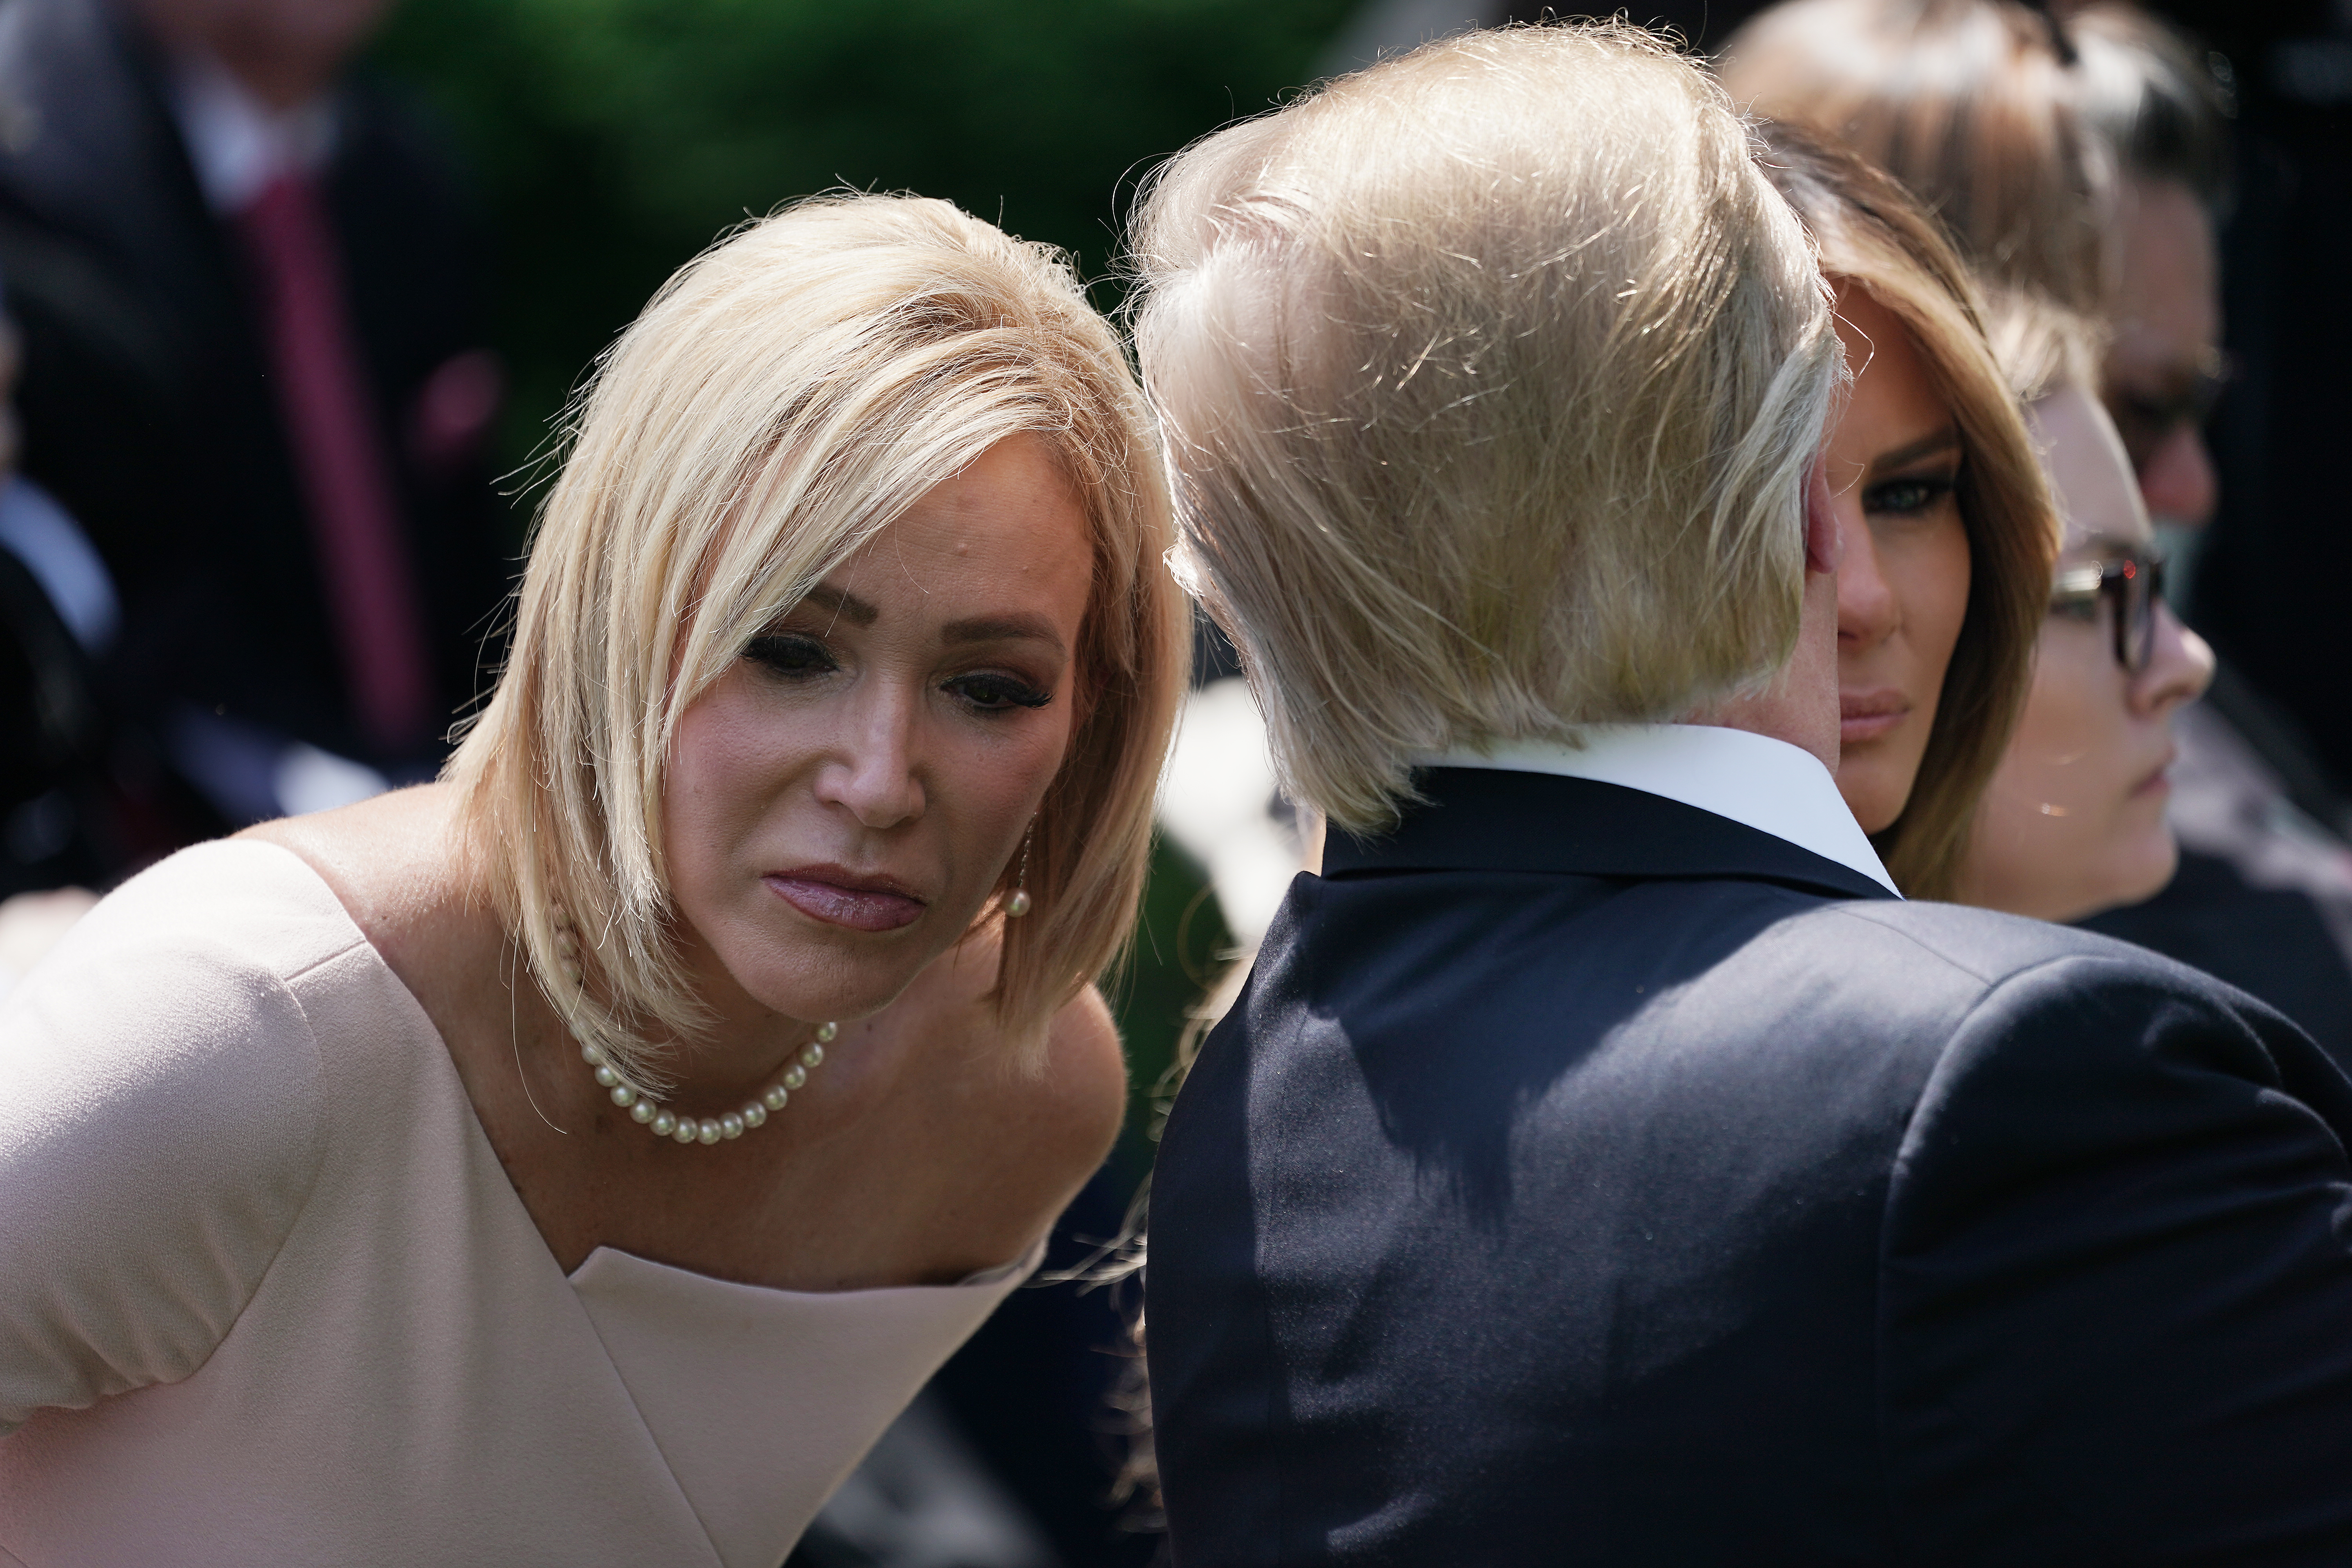 WASHINGTON, DC - MAY 02: U.S. President Donald Trump (R) speaks to Paula White, chair of the White House evangelical advisory board, during a National Day of Prayer service in the Rose Garden at the White House May 02, 2019 in Washington, DC. The White House invited leaders from various faiths and religions to participate in the day of prayer, which was designated in 1952 by the United States Congress to ask people "to turn to God in prayer and meditation." (Photo by Chip Somodevilla/Getty Images)